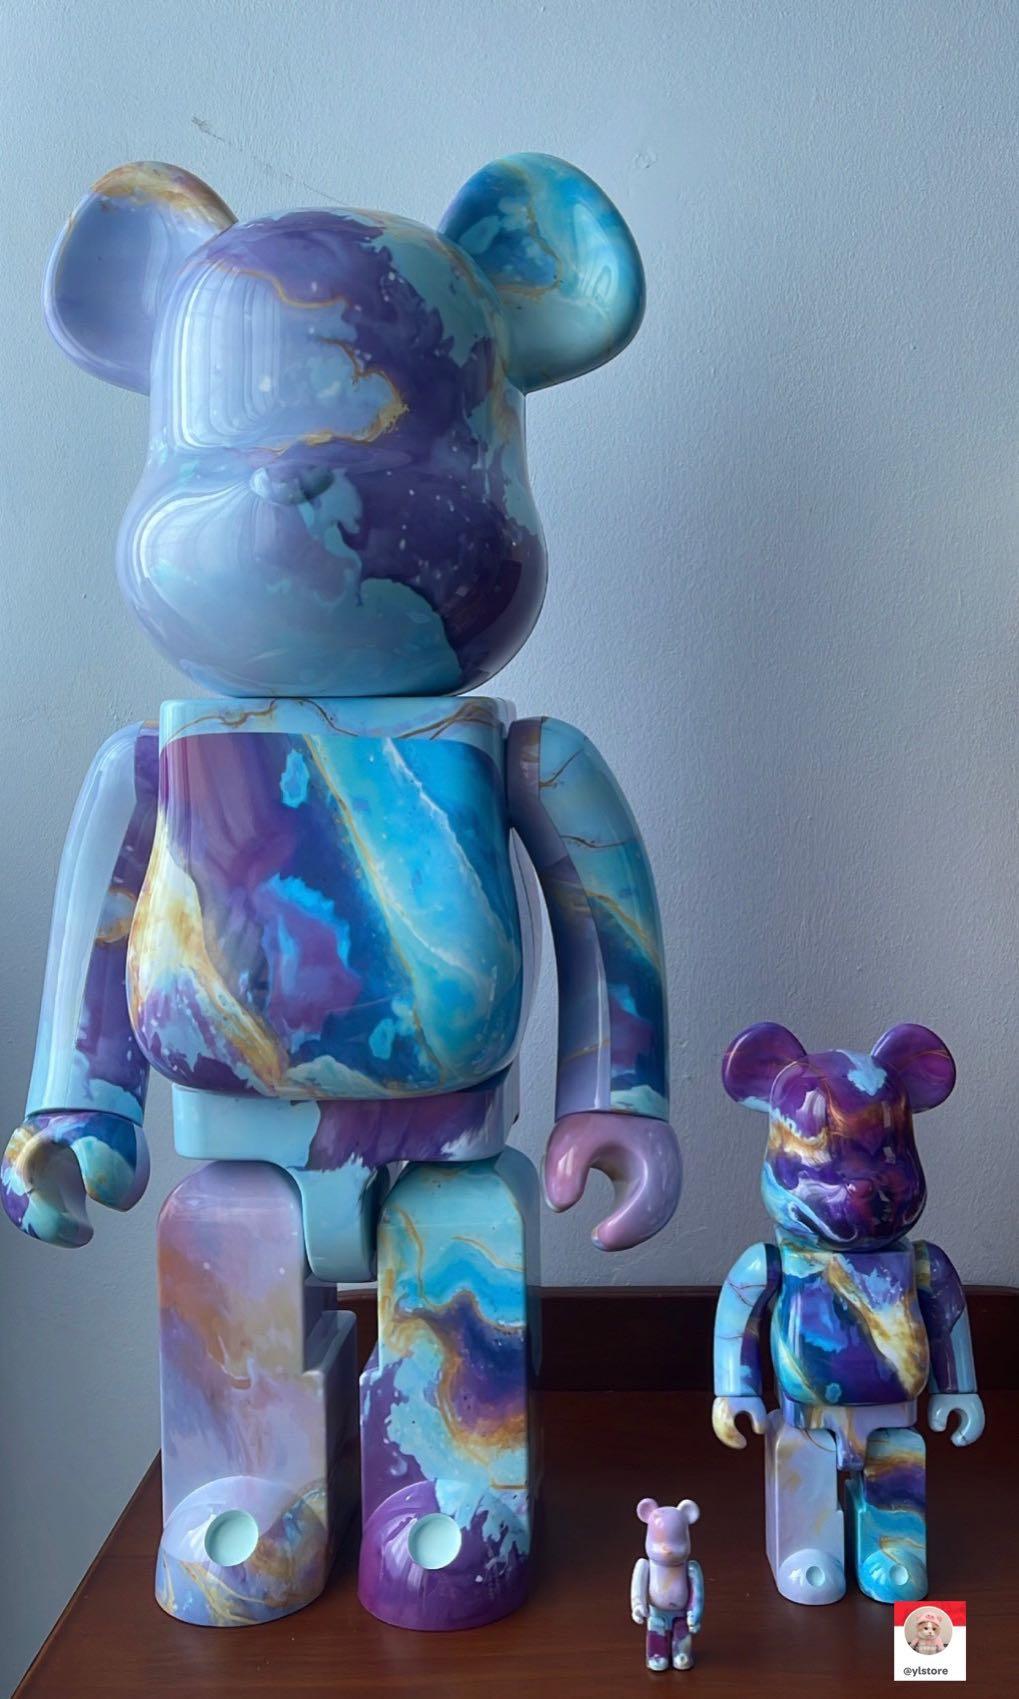 WEBストア限定 BE@RBRICK 1000% MARBLE キャラクターグッズ